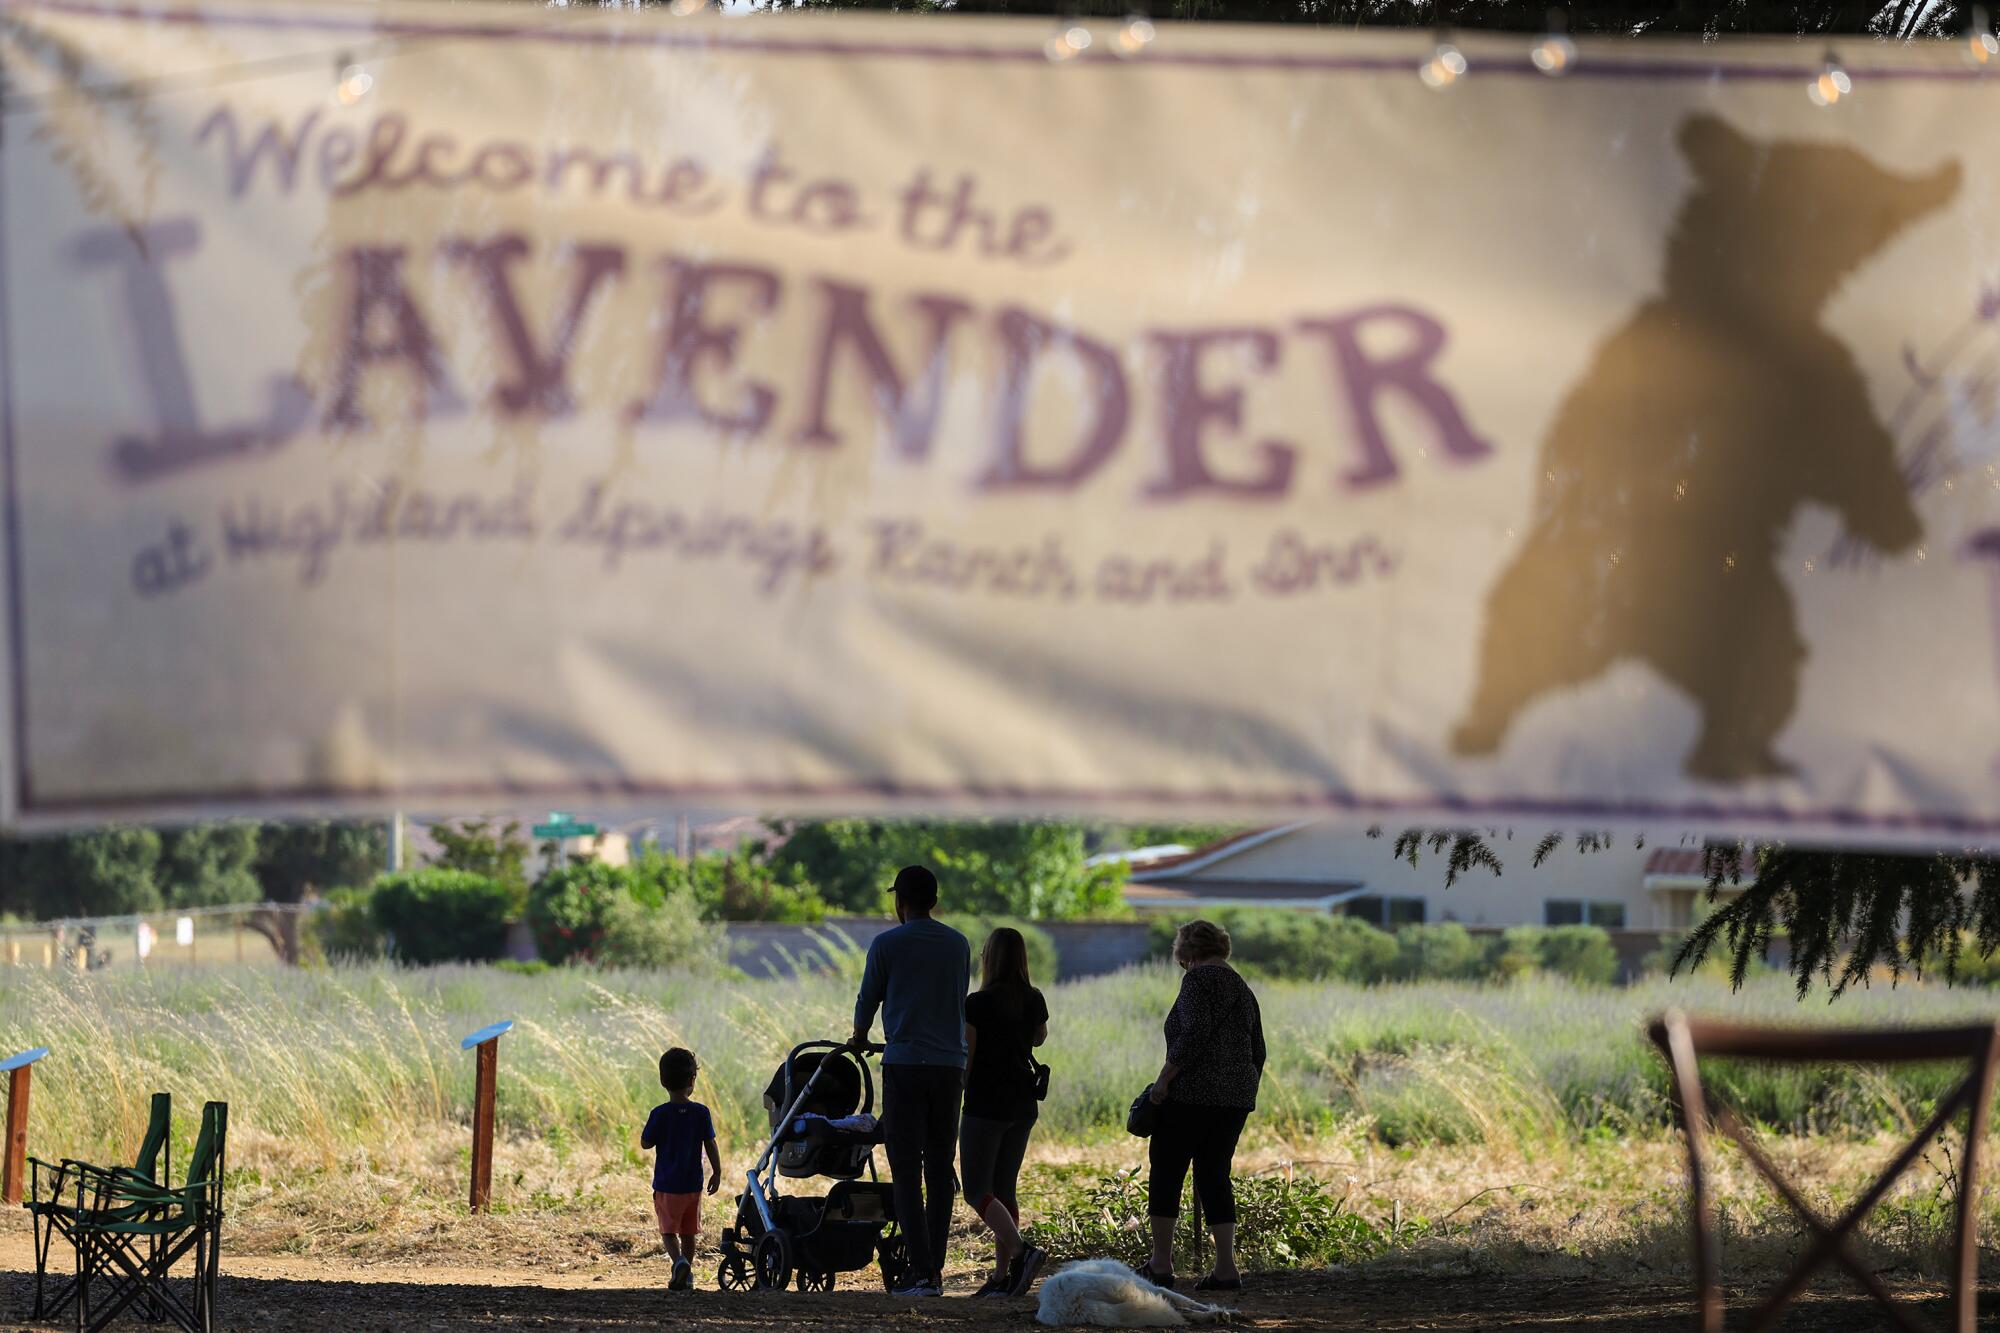 People walk under a banner that says "Welcome to the Lavender at Highland Springs Ranch and Inn"